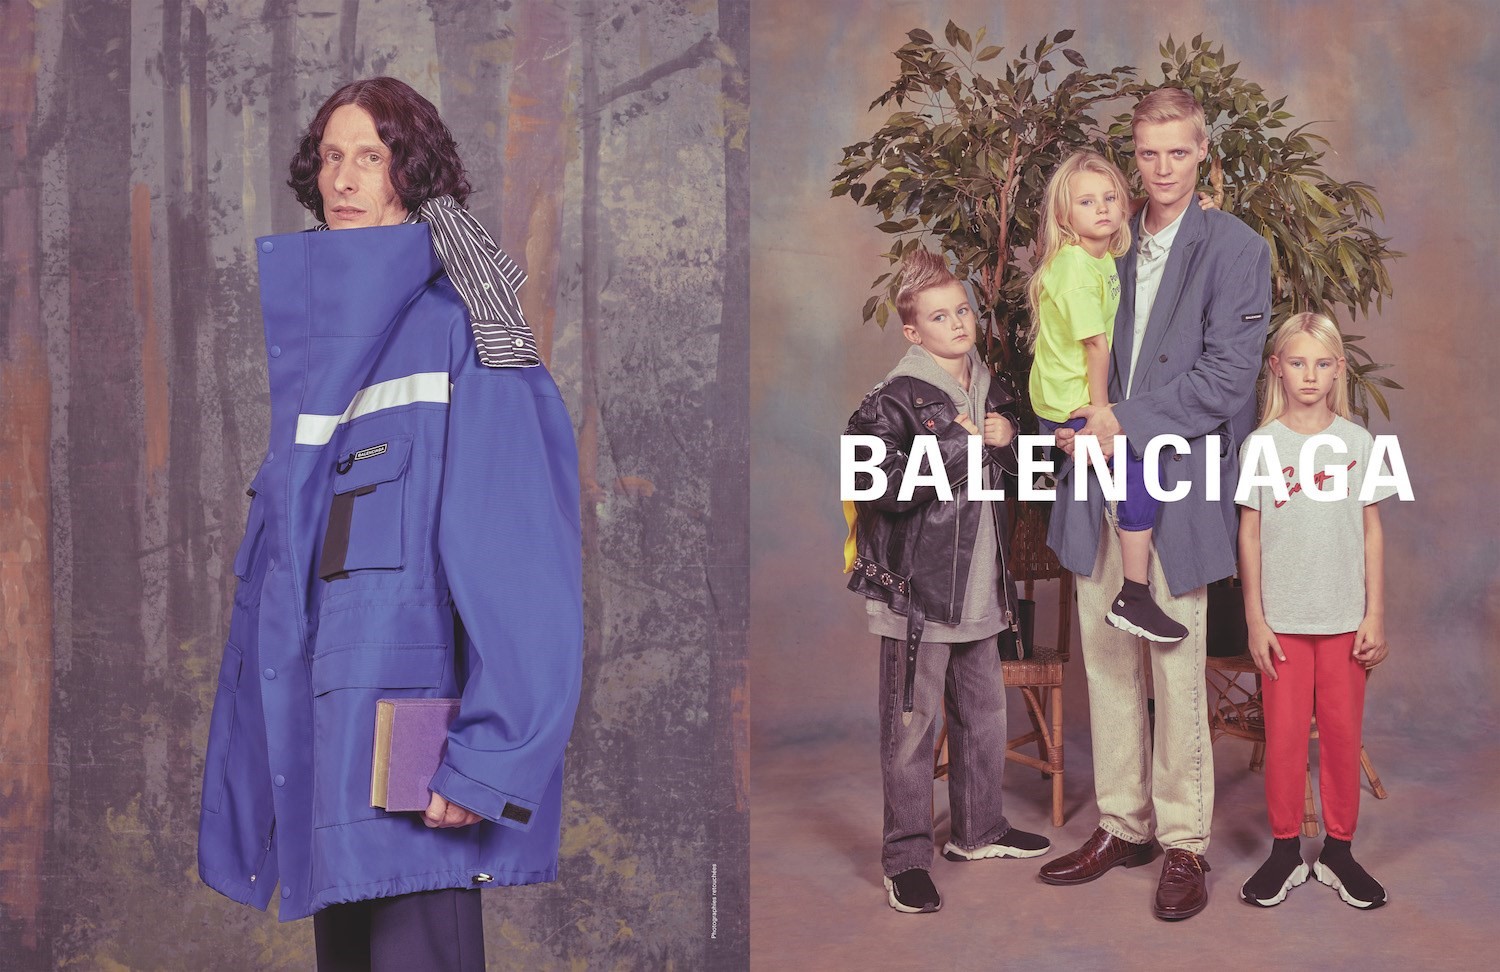 Balenciaga campaign Ad shows child with teddy bear dressed in BDSM outfit   Daily Mail Online